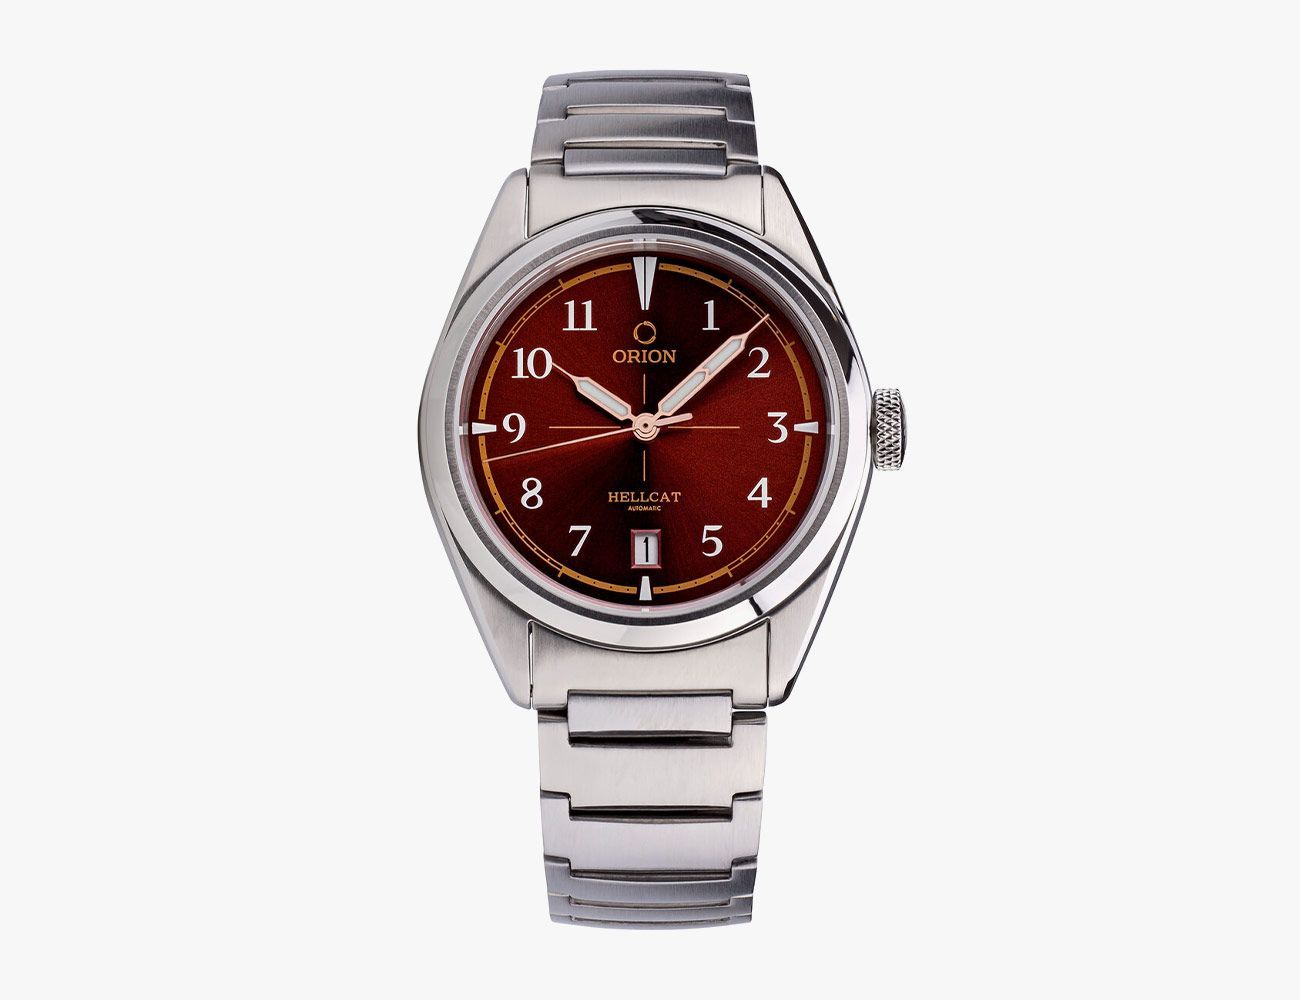 Ru Meestal Oeps 25 Boutique Watch Brands You Should Know About